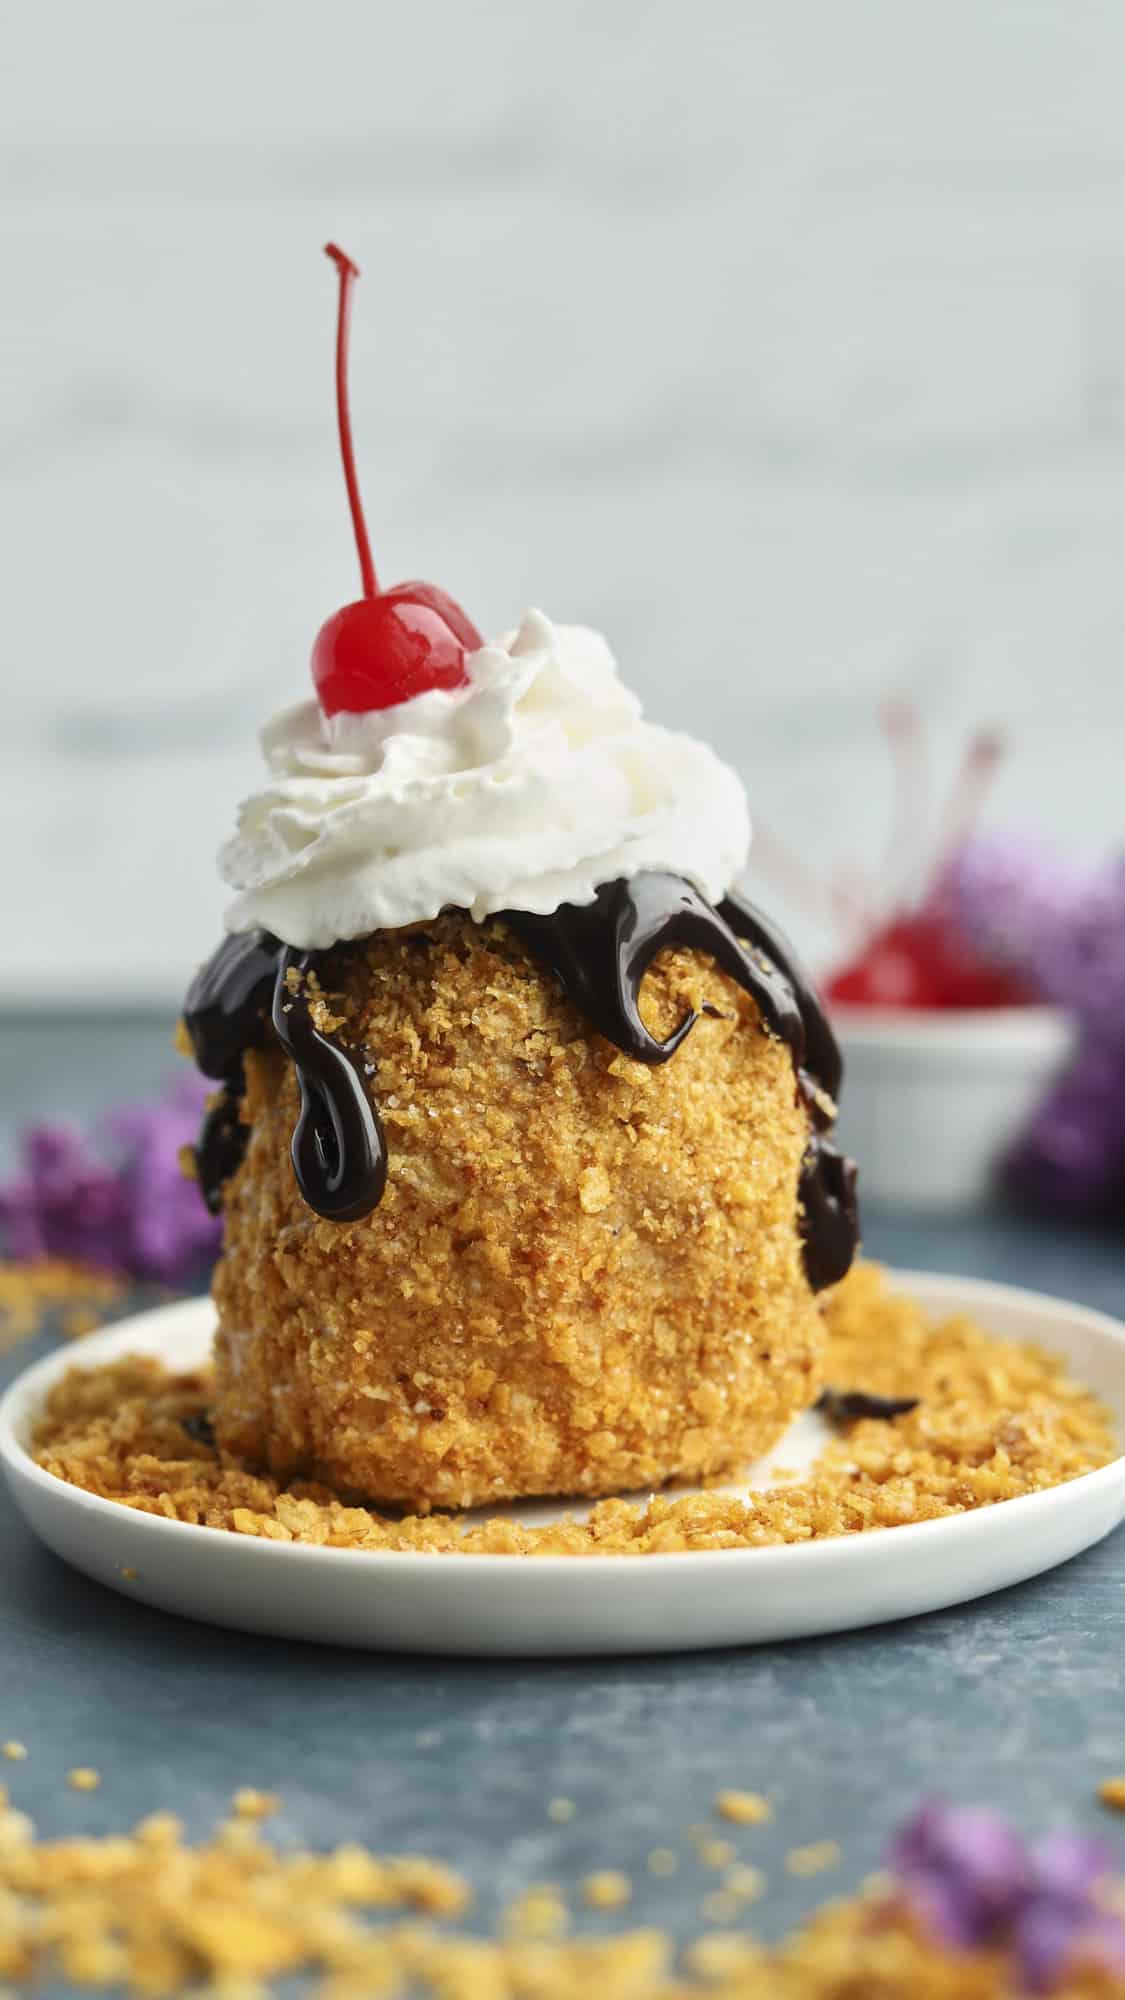 fried ice cream on a plate topped with chocolate sauce, whipped cream, and a cherry.